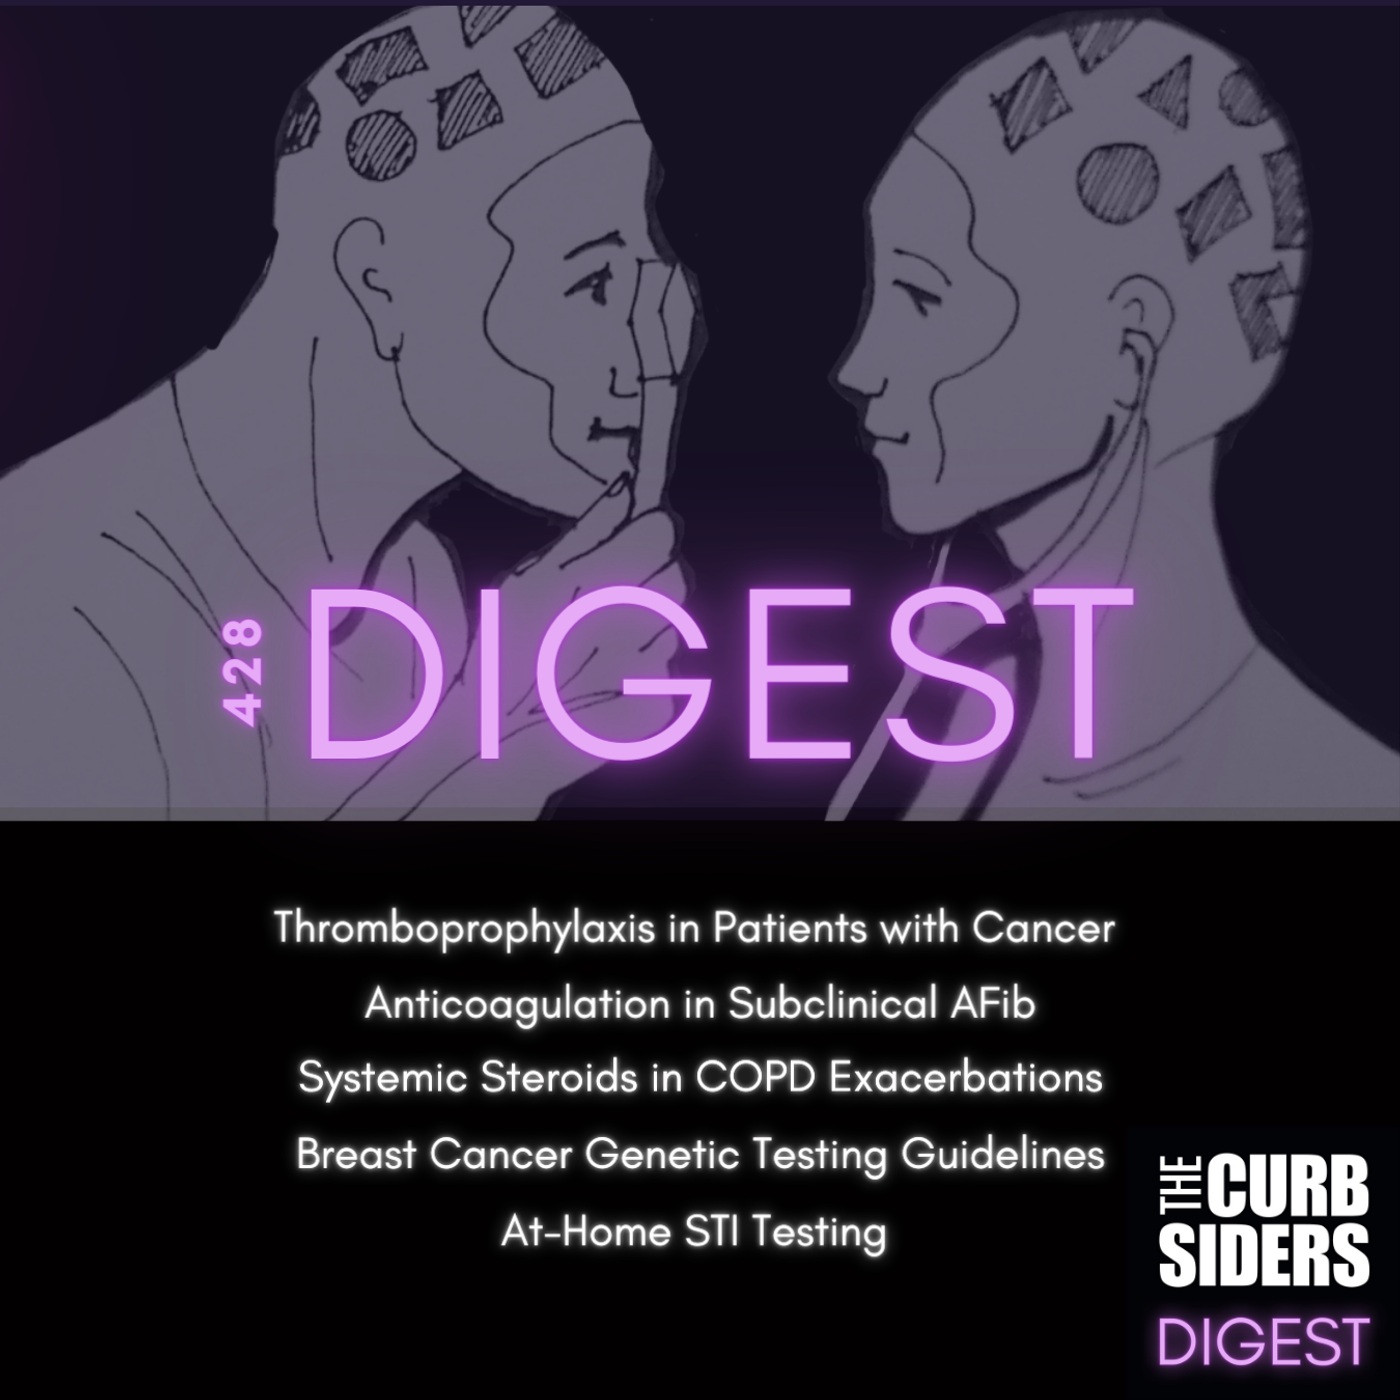 #428 DIGEST: DVT prophylaxis in patients with cancer, anticoagulation in subclinical AFib, steroids in COPD exacerbations, breast cancer genetic testing guidelines, and at-home STI testing